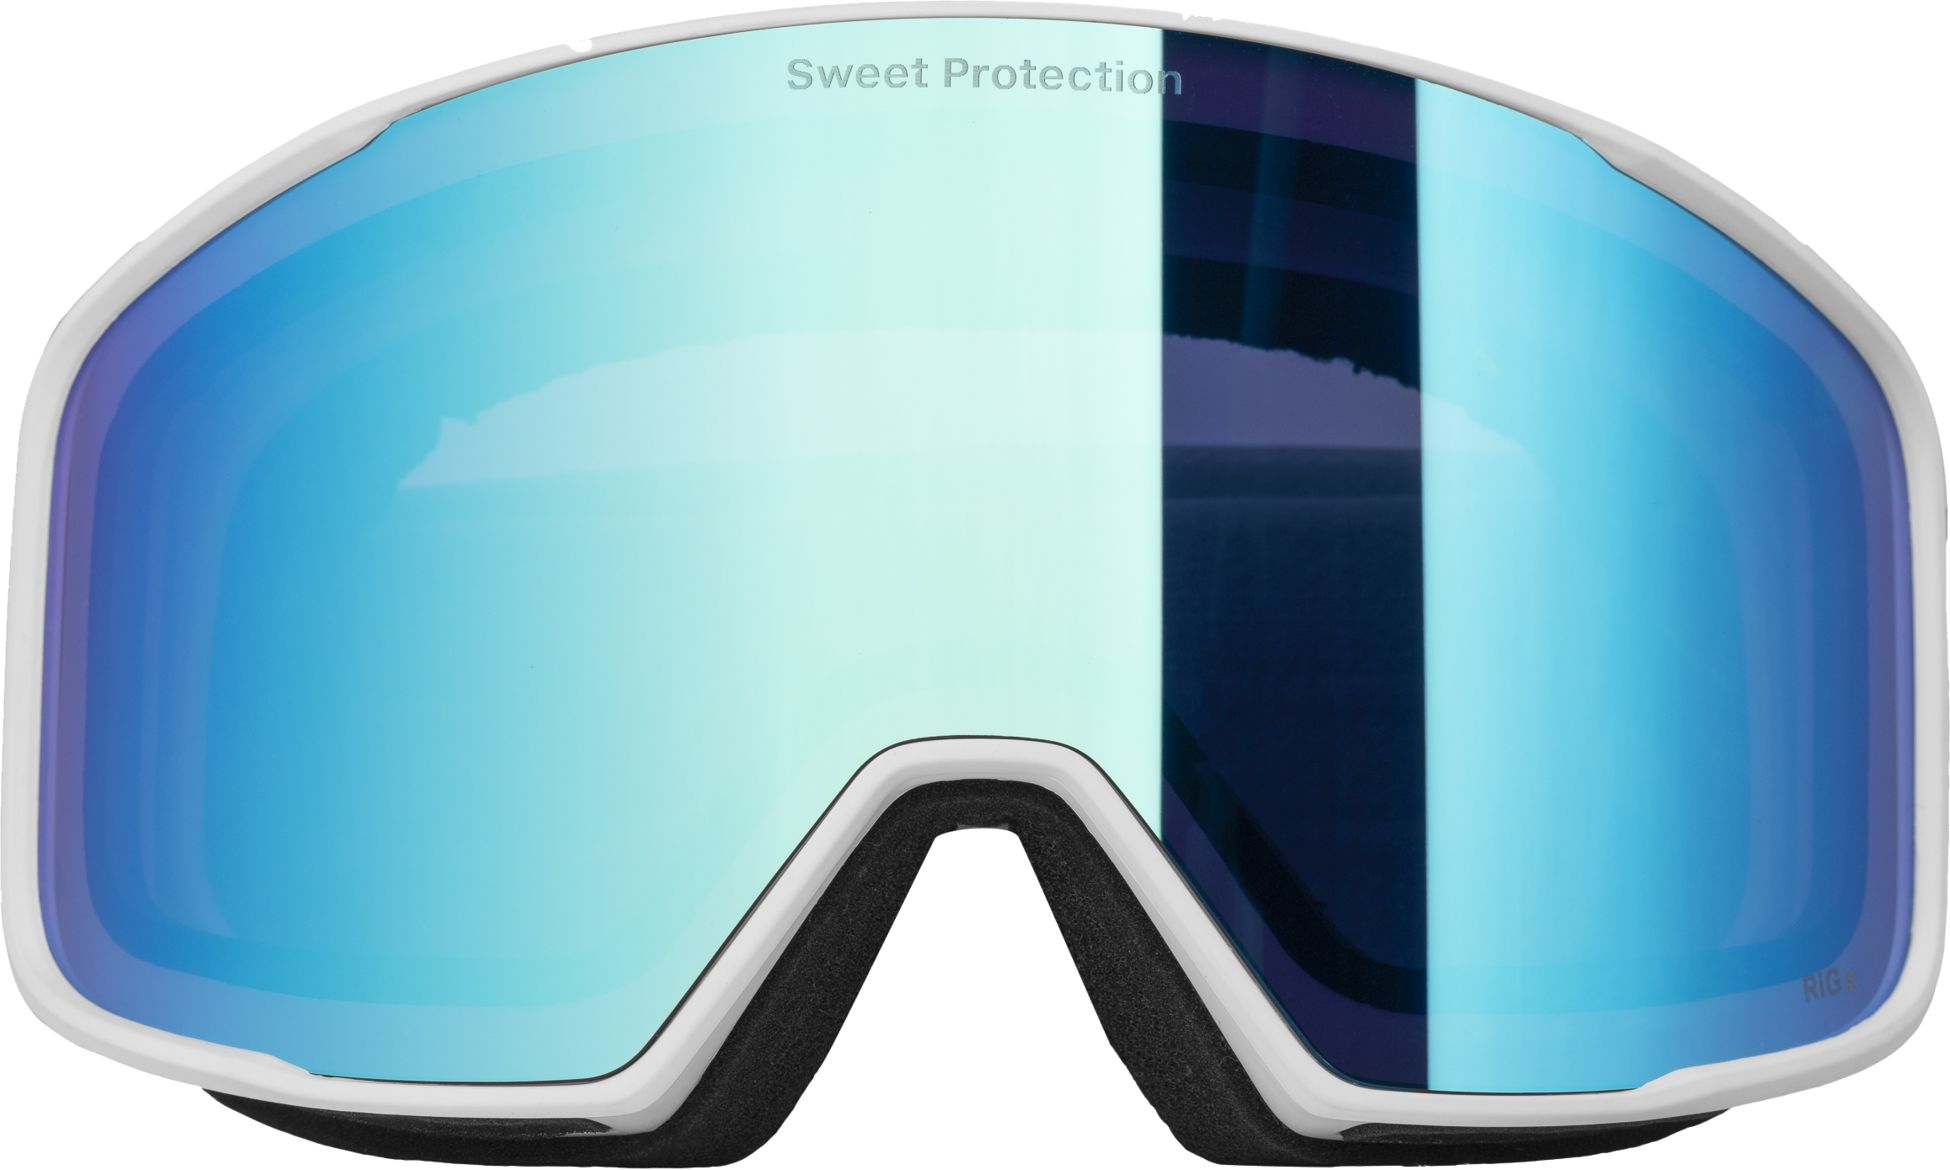 SWEET PROTECTION, Boondock RIG Reflect